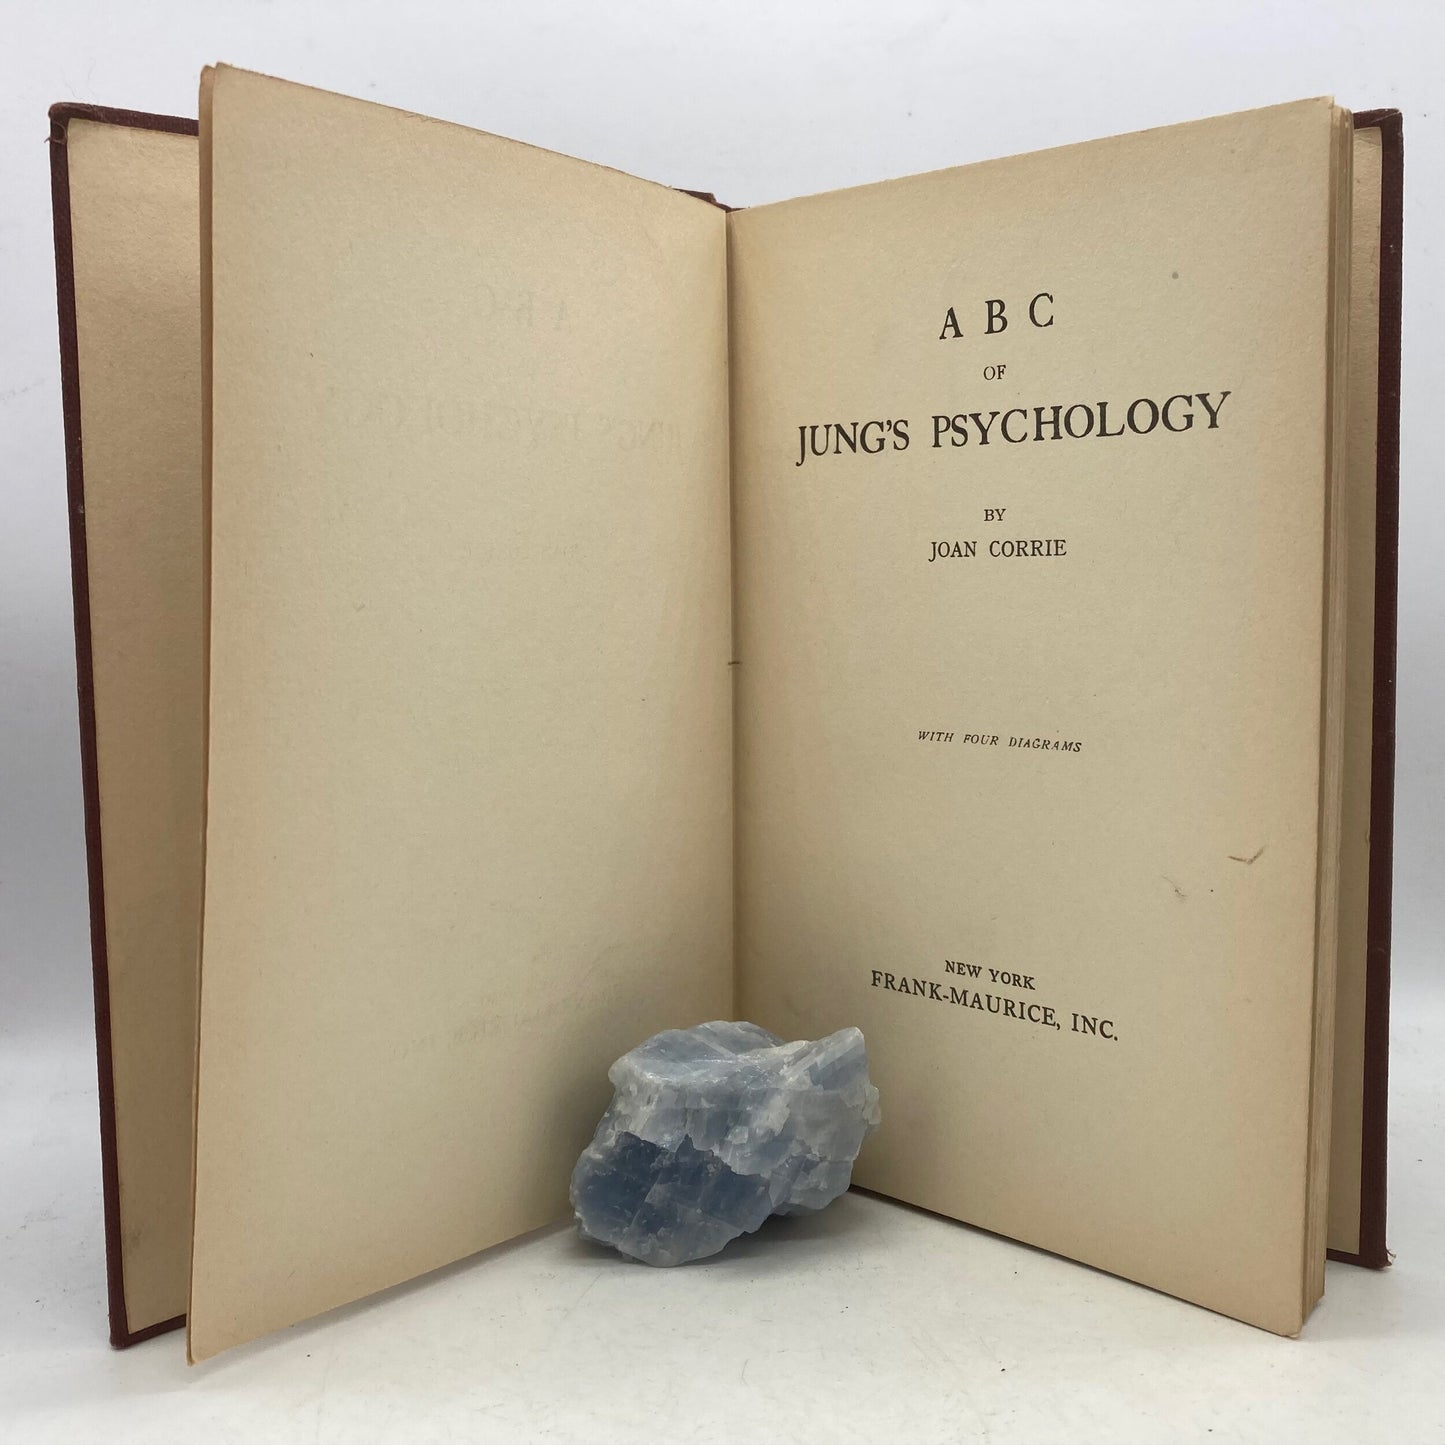 CORRIE, Joan "ABC of Jung's Philosophy" [Frank-Maurice, c1927] - Buzz Bookstore